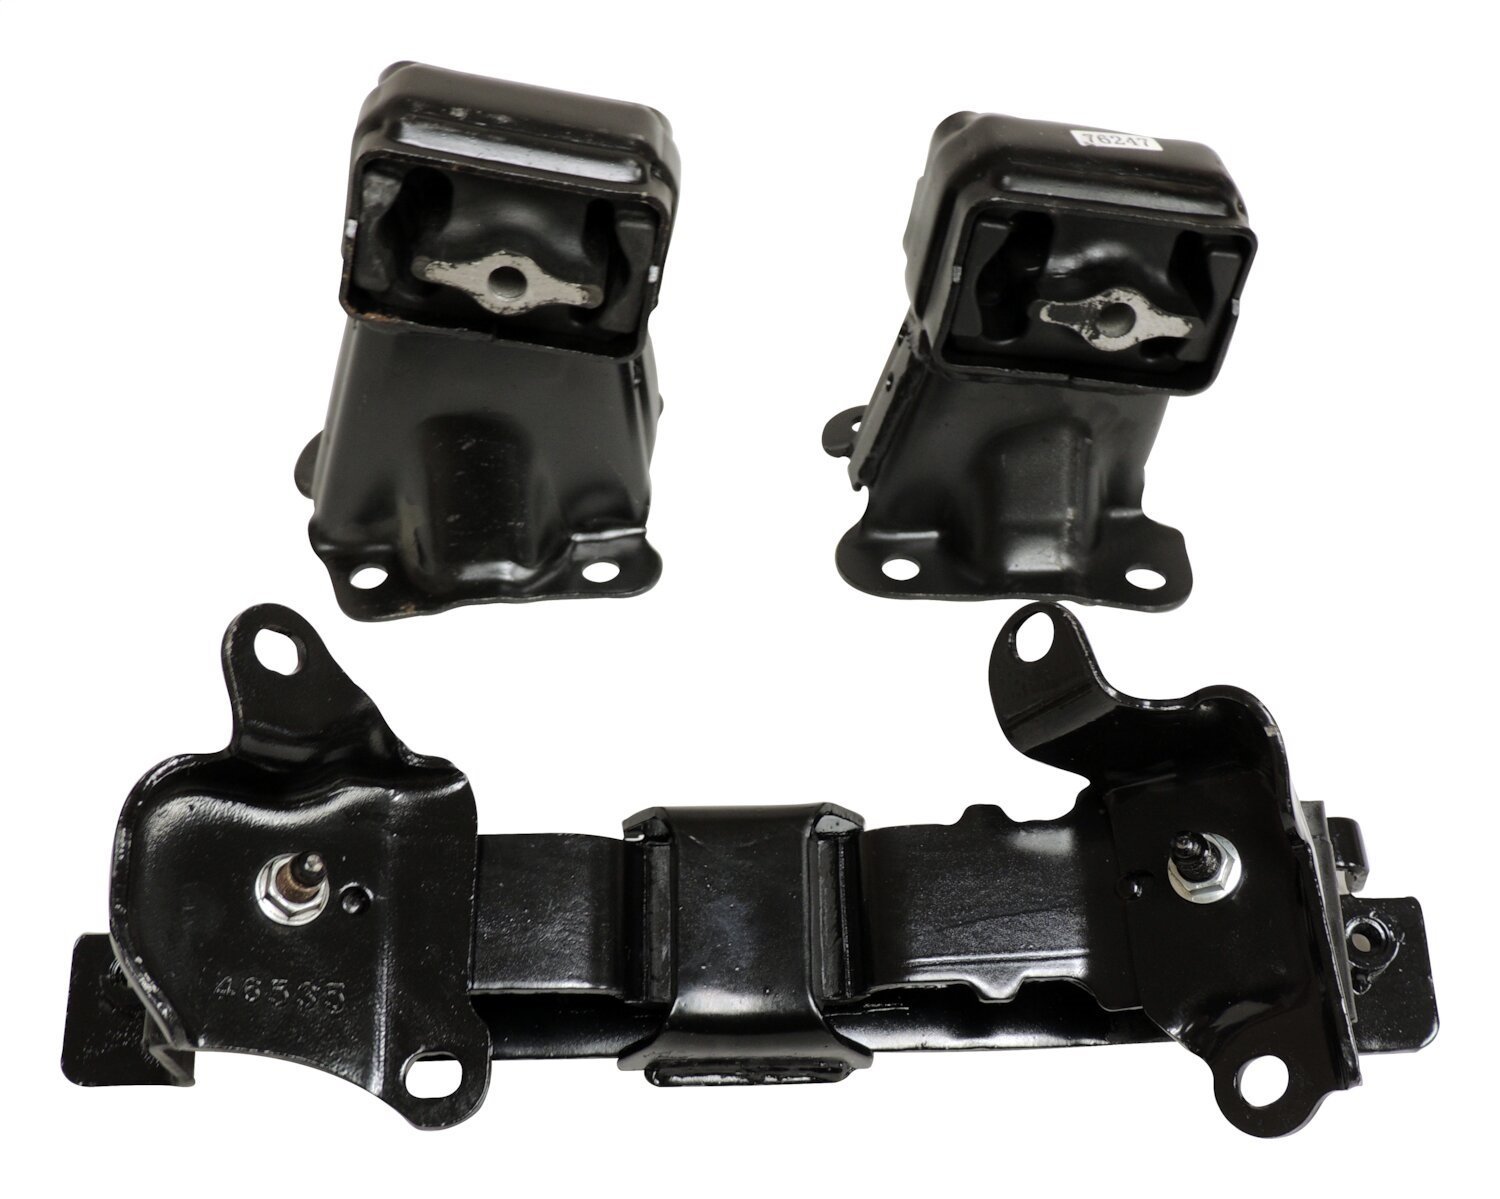 Engine & Transmission Mount Kit for 2005-2009 Jeep Grand Cherokee, Commander 4WD w/4.7L Engine